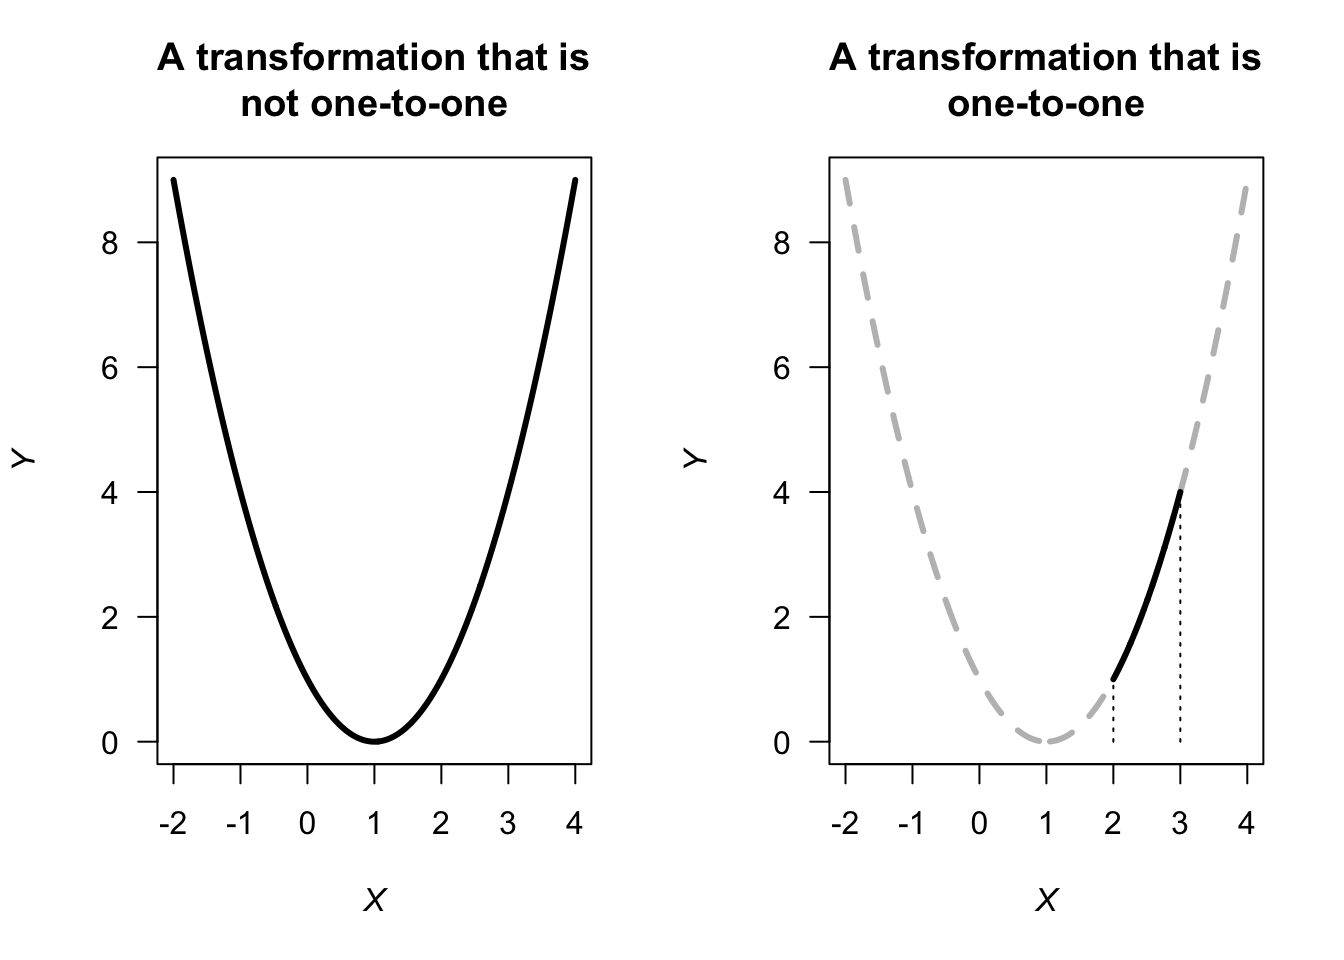 Two transformations: a non-one-to-one transformation (left panel), and a one-to-one transformation (right panel)